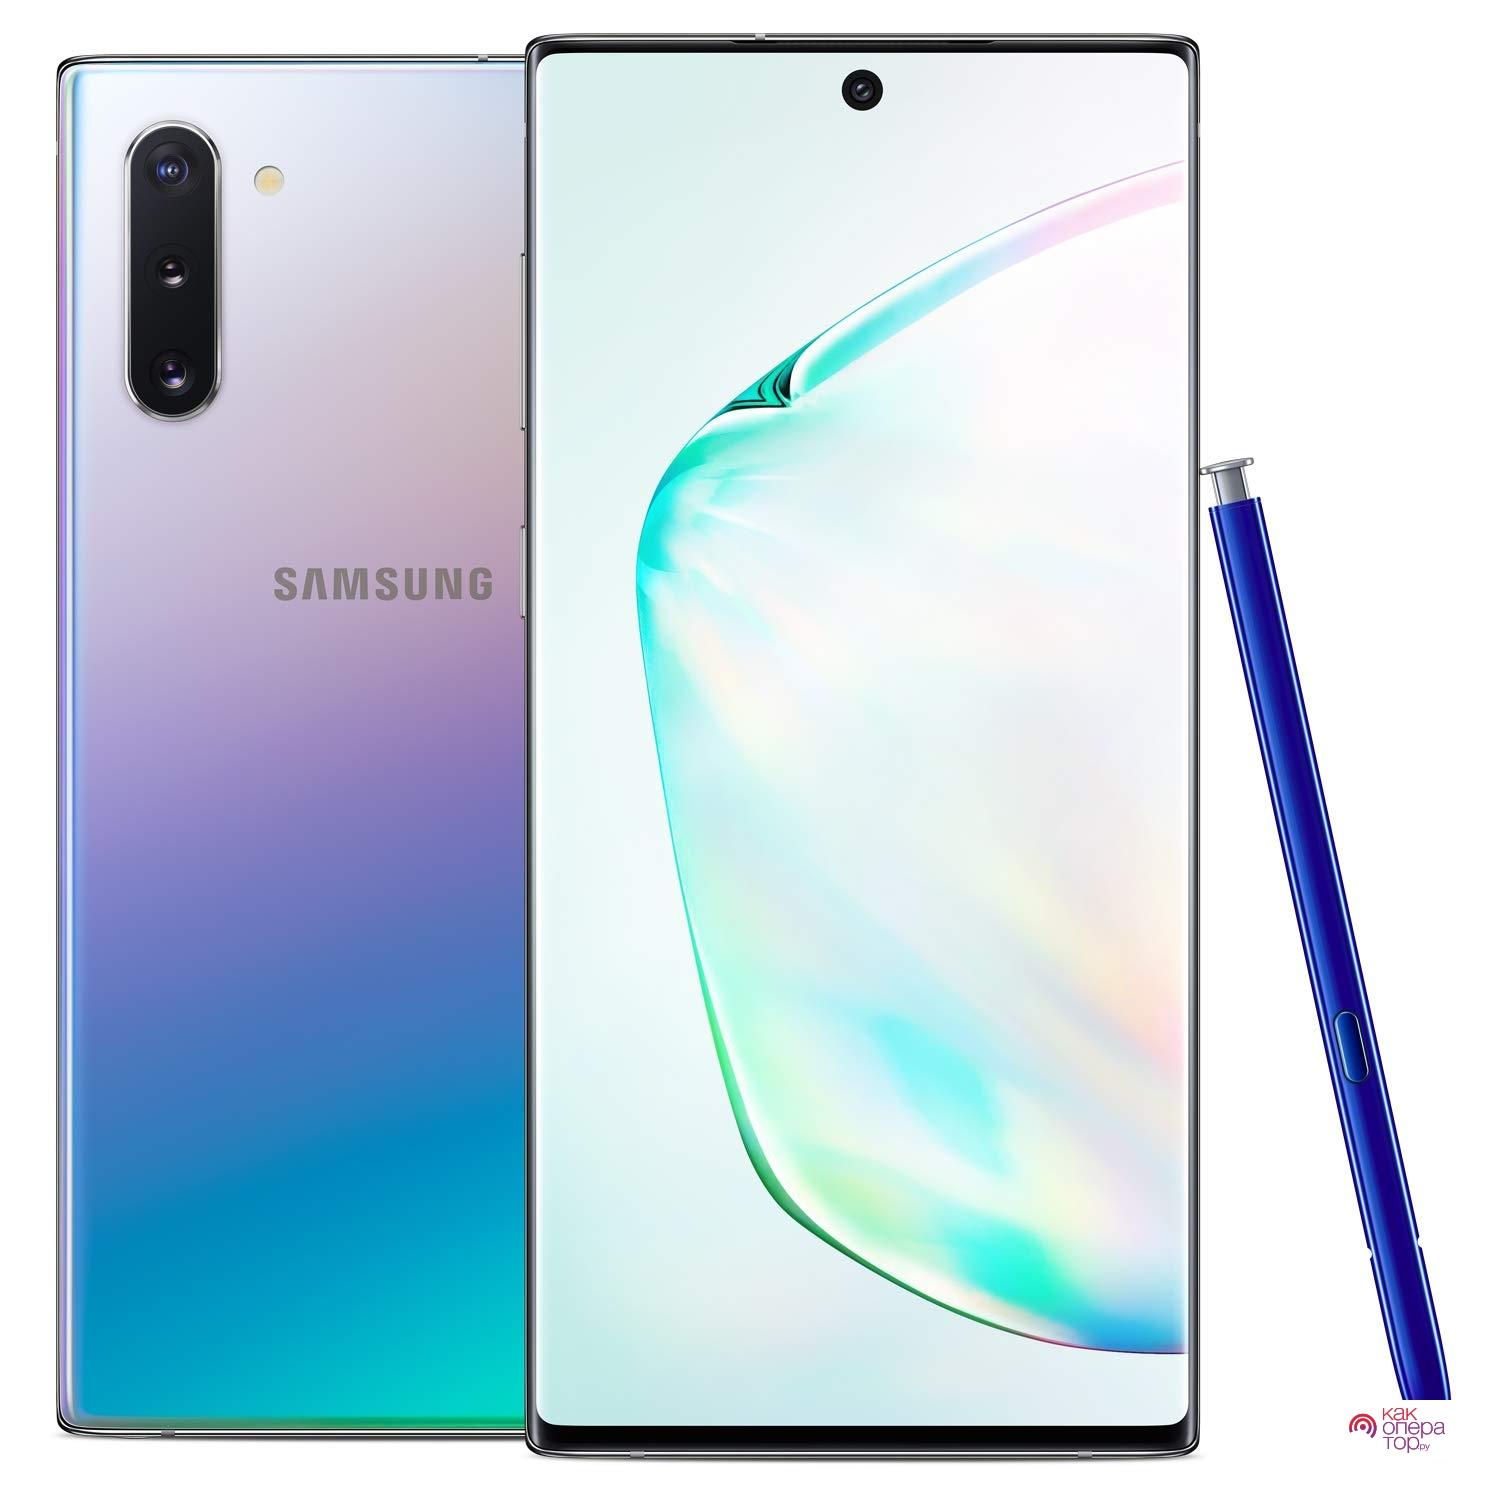 Samsung Galaxy Note 10 Factory Unlocked Cell Phone with 256GB (U.S. Warranty), Aura Glow (Silver) Note10